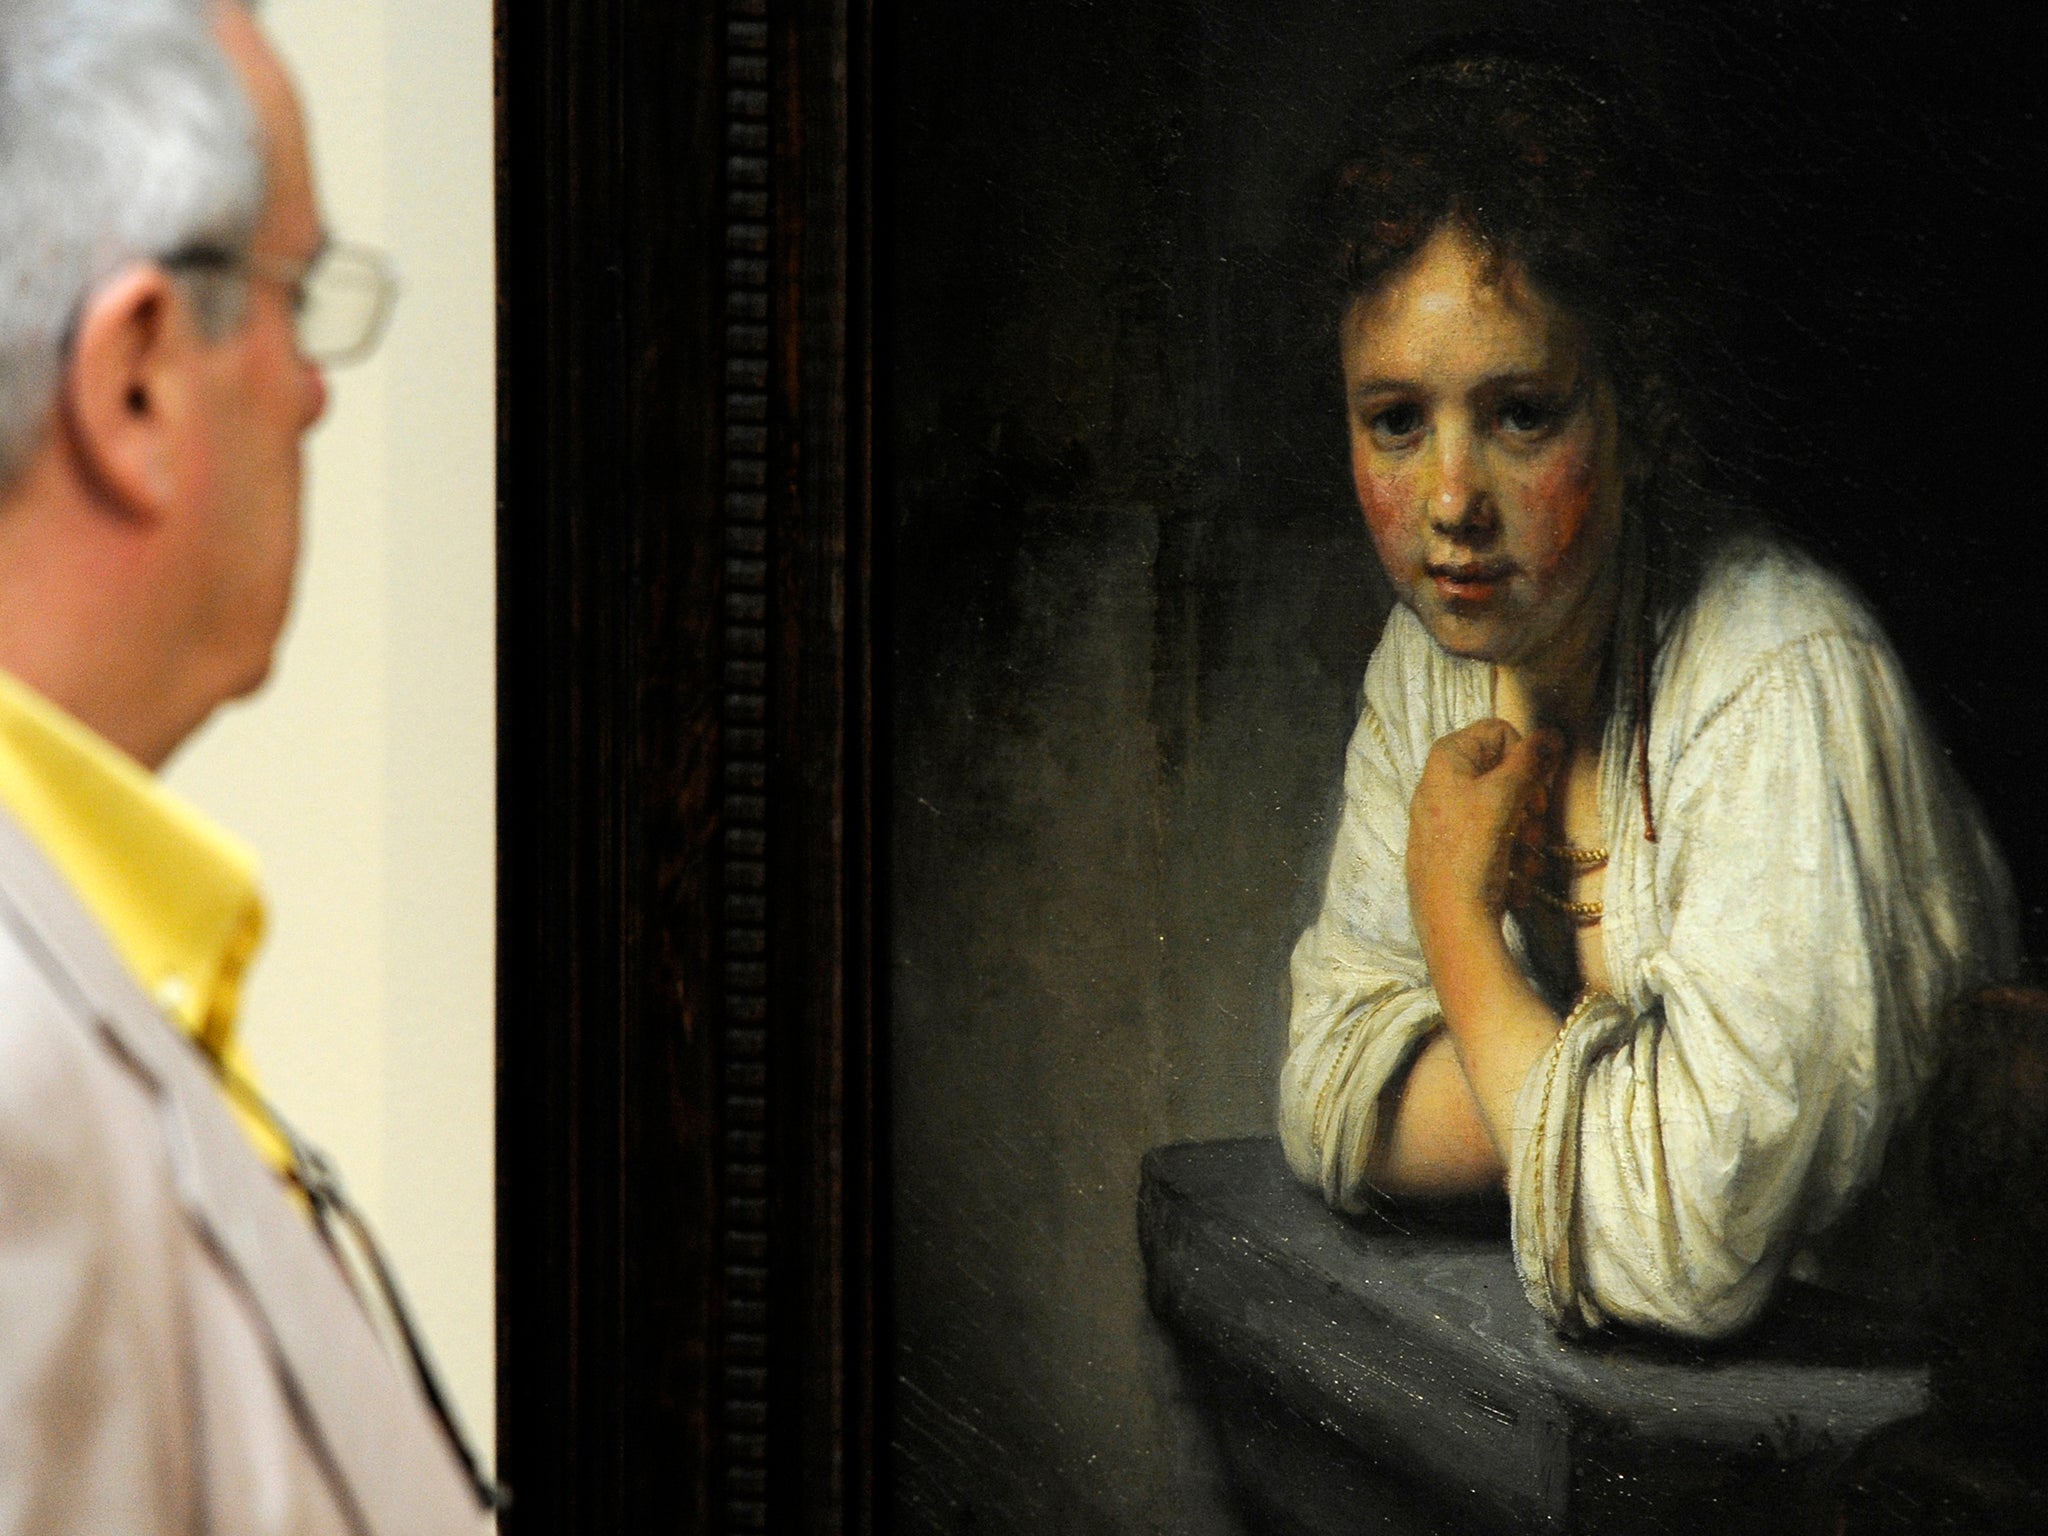 &#13;
‘A Young Girl Leaning on a Window Sill’ at the Turner and the Masters exhibition at Madrid’s El Prado museum (Getty)&#13;